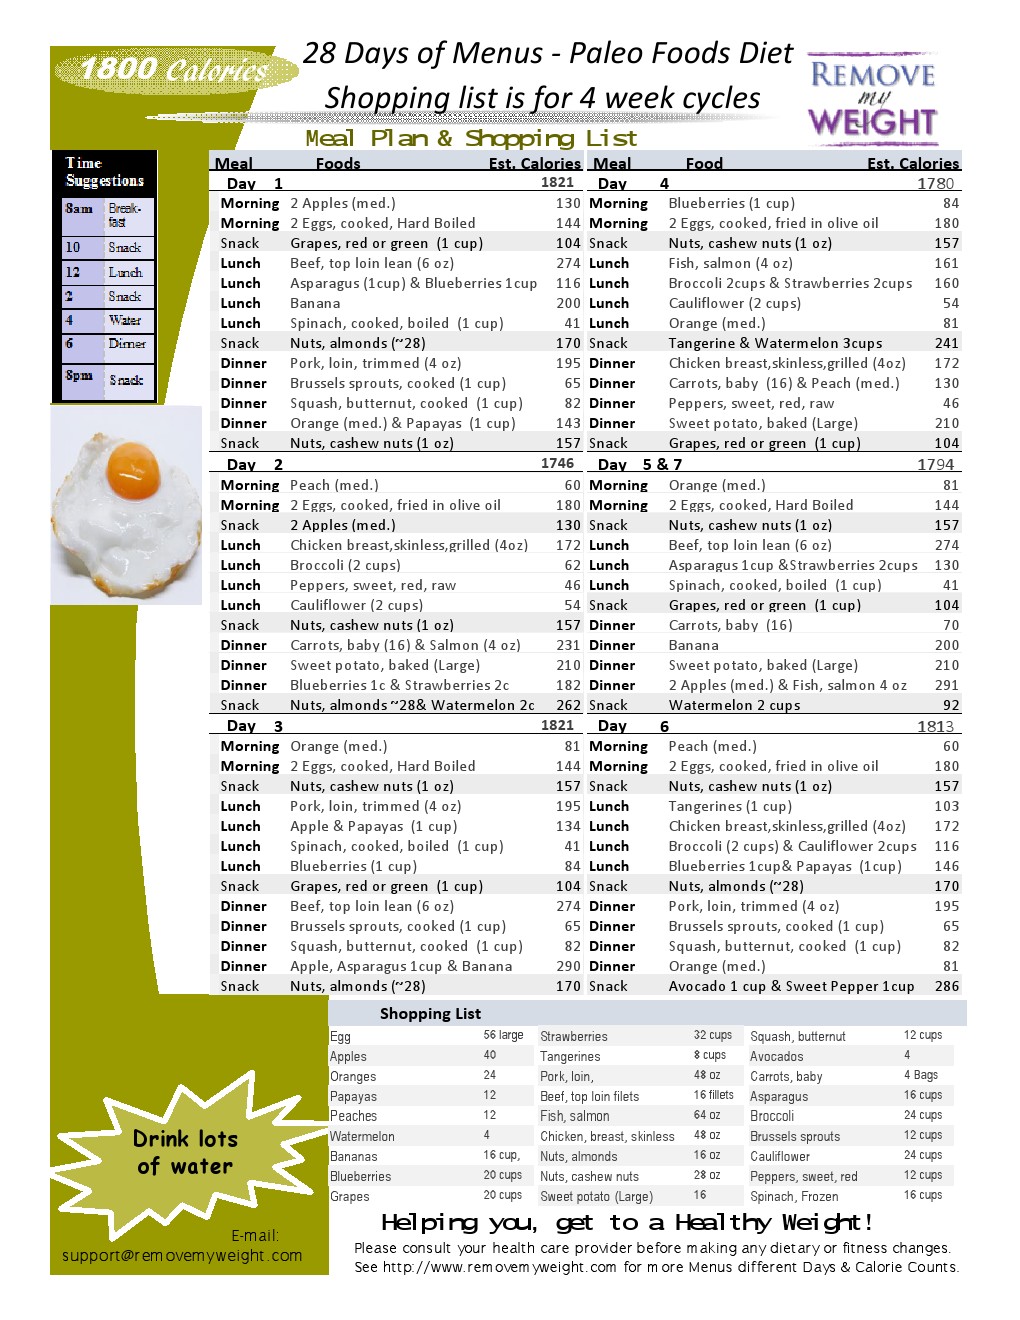 paleo-diet-28-day-1800-calorie-meal-plan-free-download-menu-plan-for-weight-loss